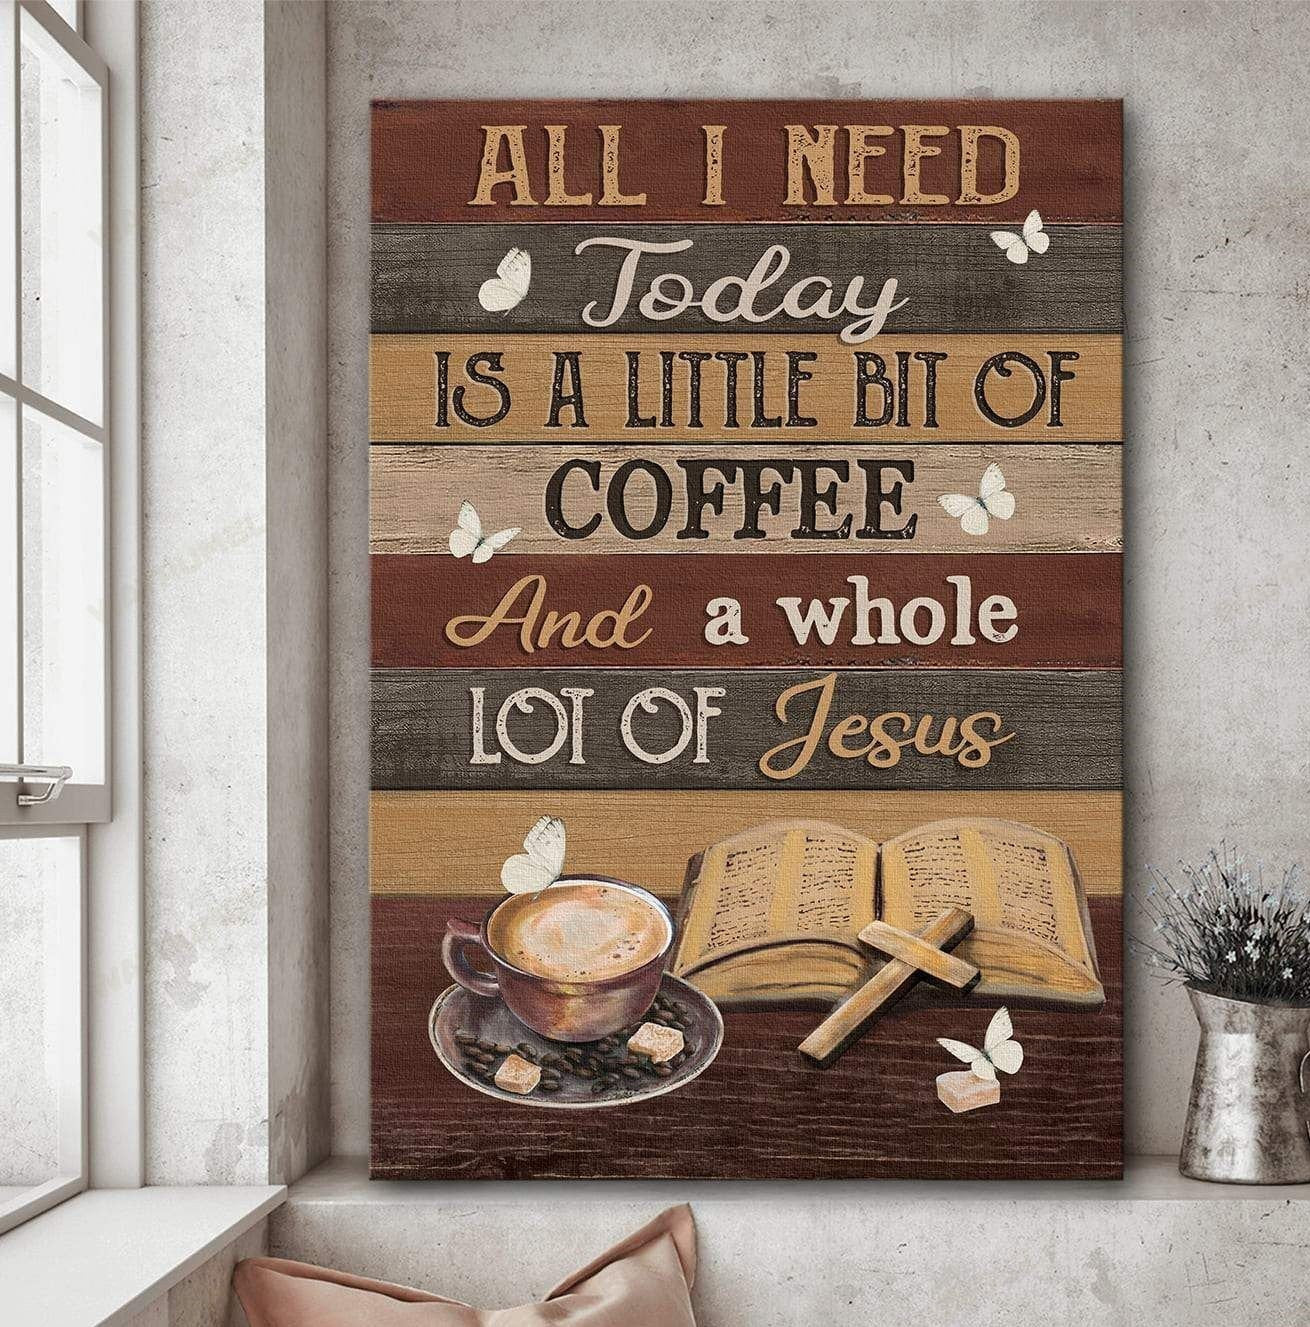 Need Is Coffee And A Whole Lot Of Jesus Home Poster Canvas Home Decoration Gift For Men Women Father Mother – Gigo Smart